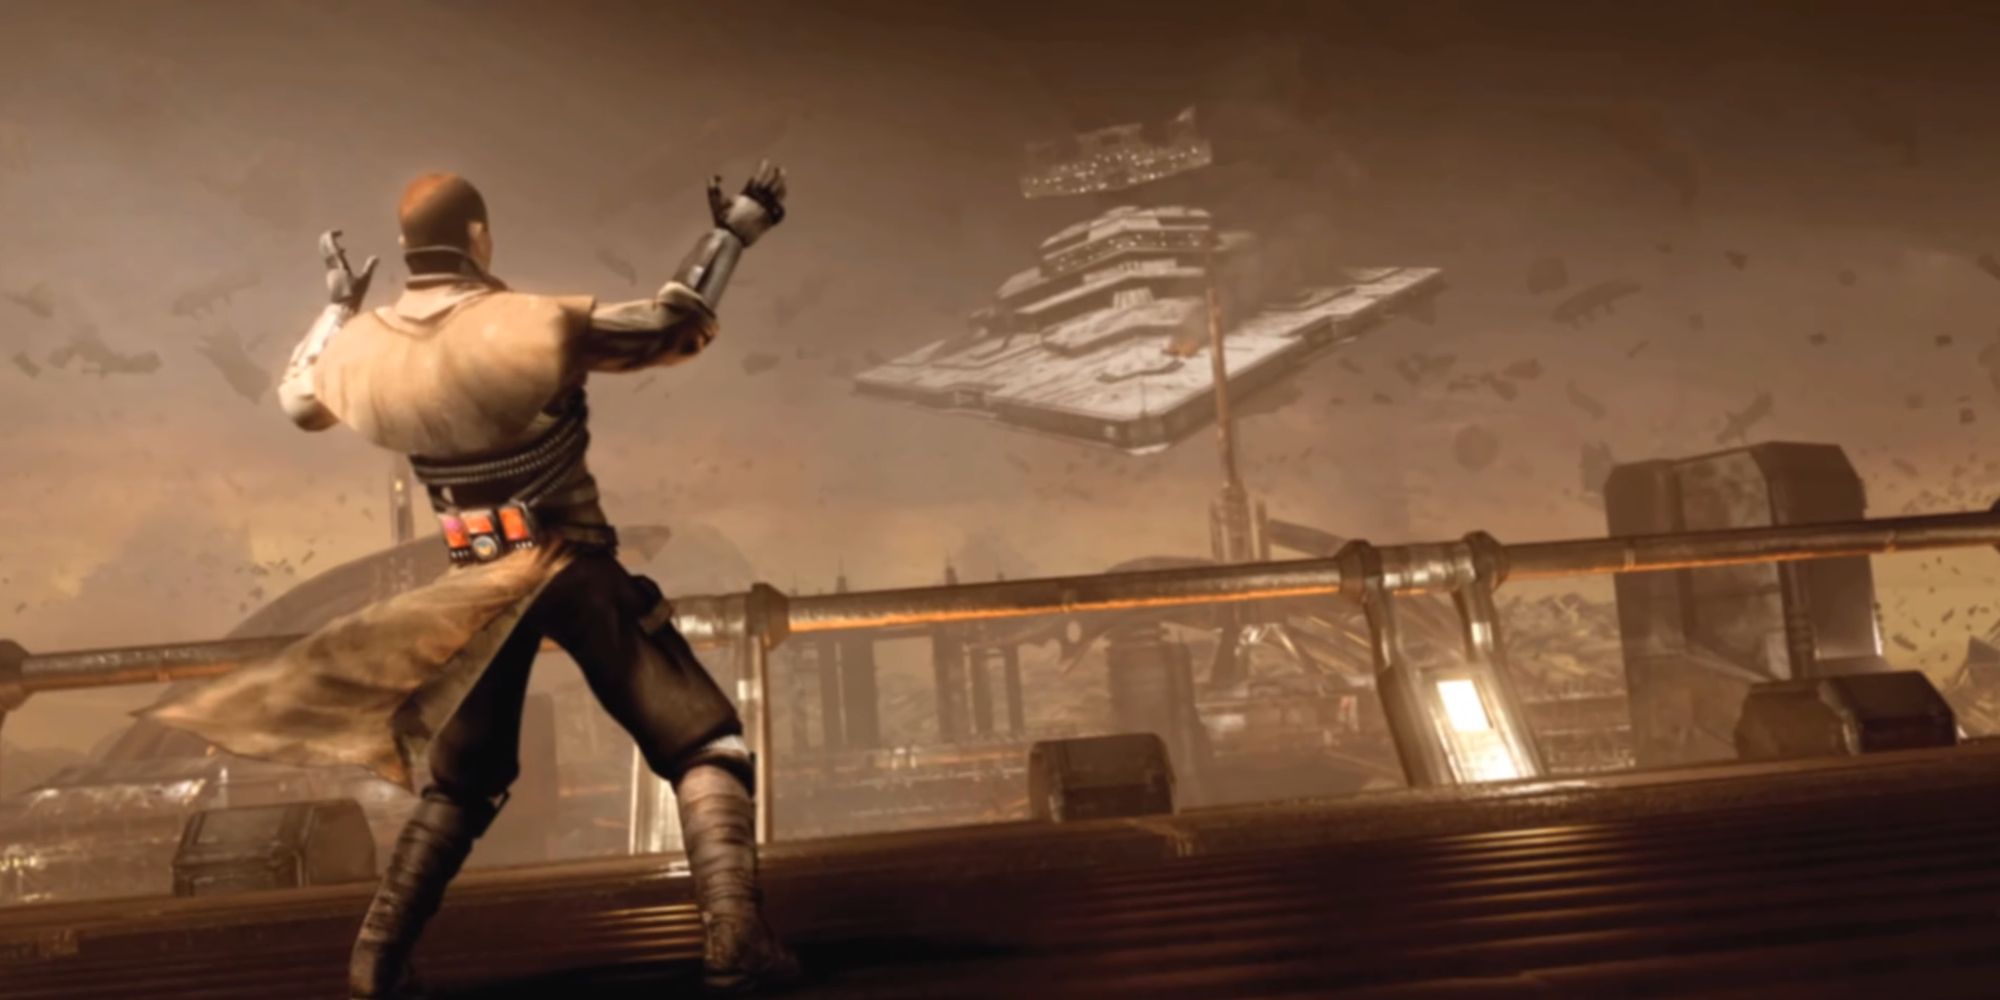 Starkiller pulling down a Star Destroyer in The Force Unleashed